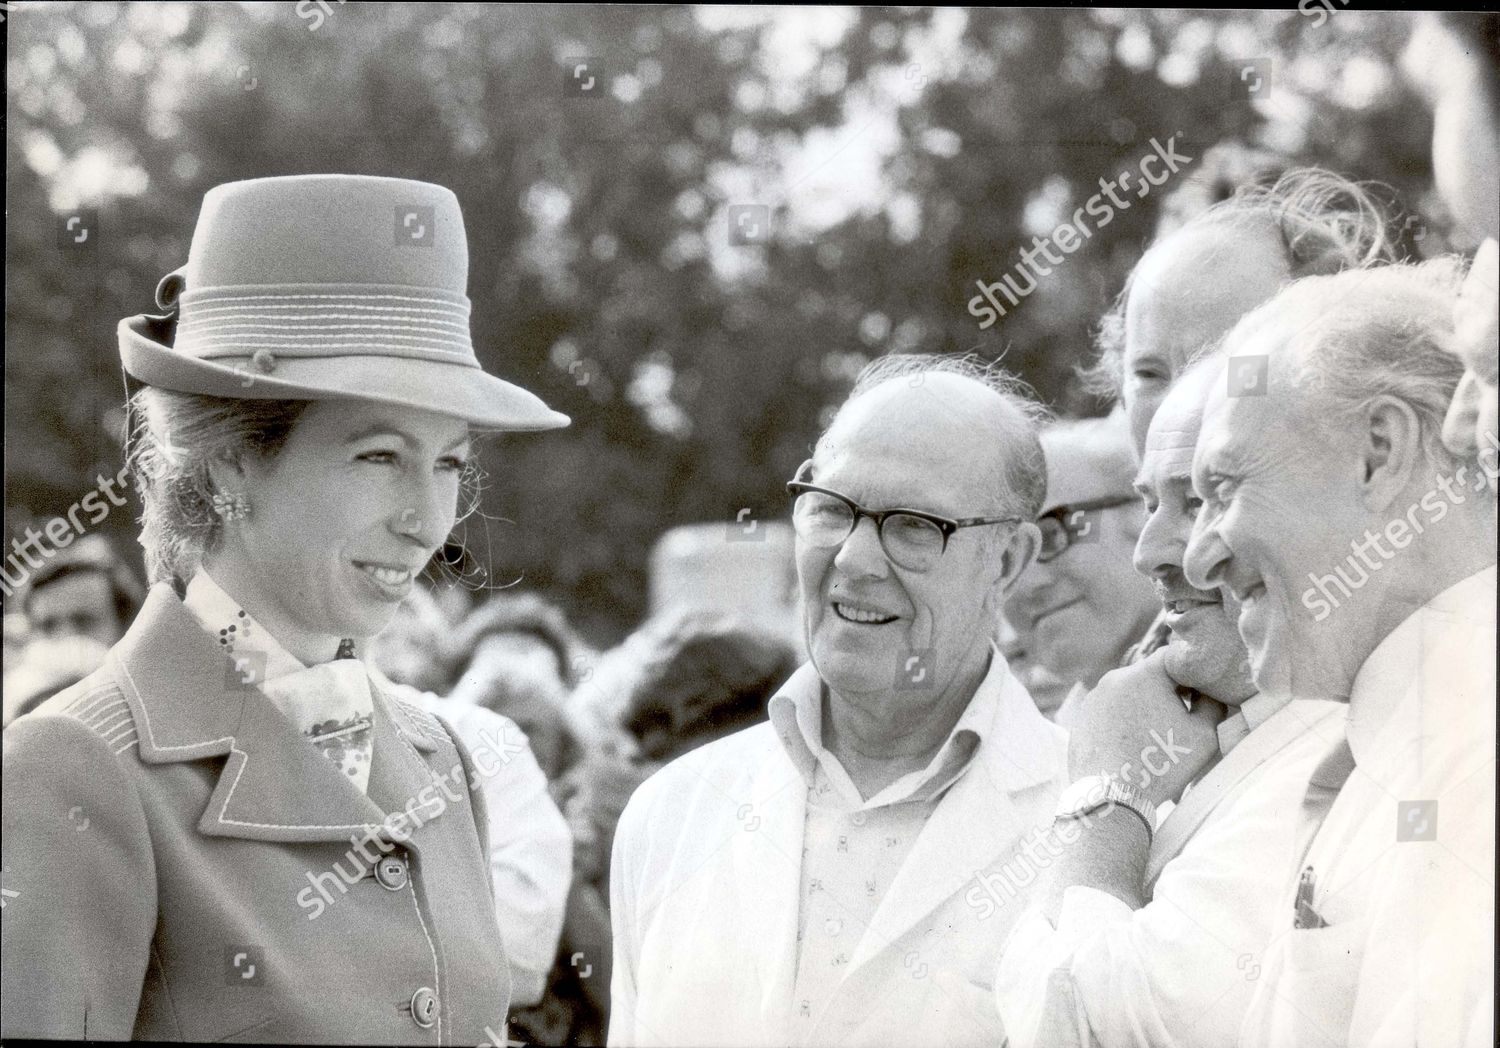 princess-anne-now-princess-royal-october-1978-princess-anne-may-well-be-able-to-offer-some-useful-hints-to-her-staff-it-in-the-future-they-encounter-the-problem-that-besets-so-many-house-wives-what-to-do-when-the-vacuum-cleaner-stops-working-the-shutterstock-editorial-890883a.jpg